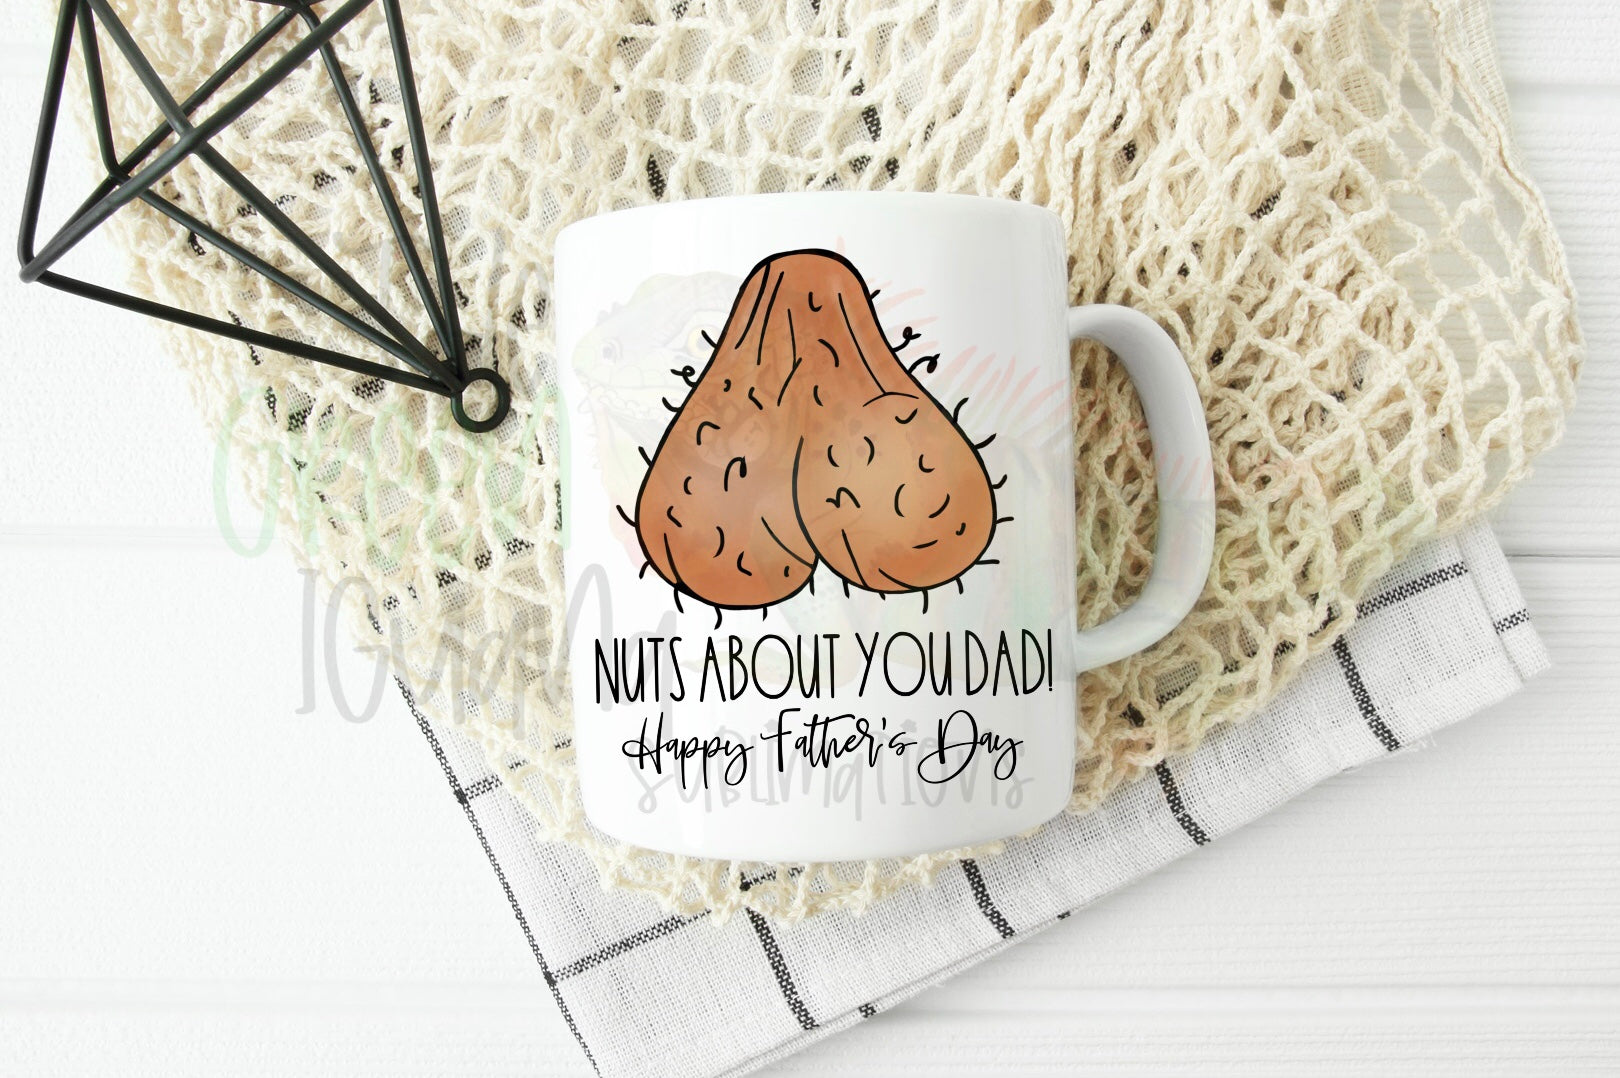 Nuts about you dad! Happy Father’s Day - DTF transfer